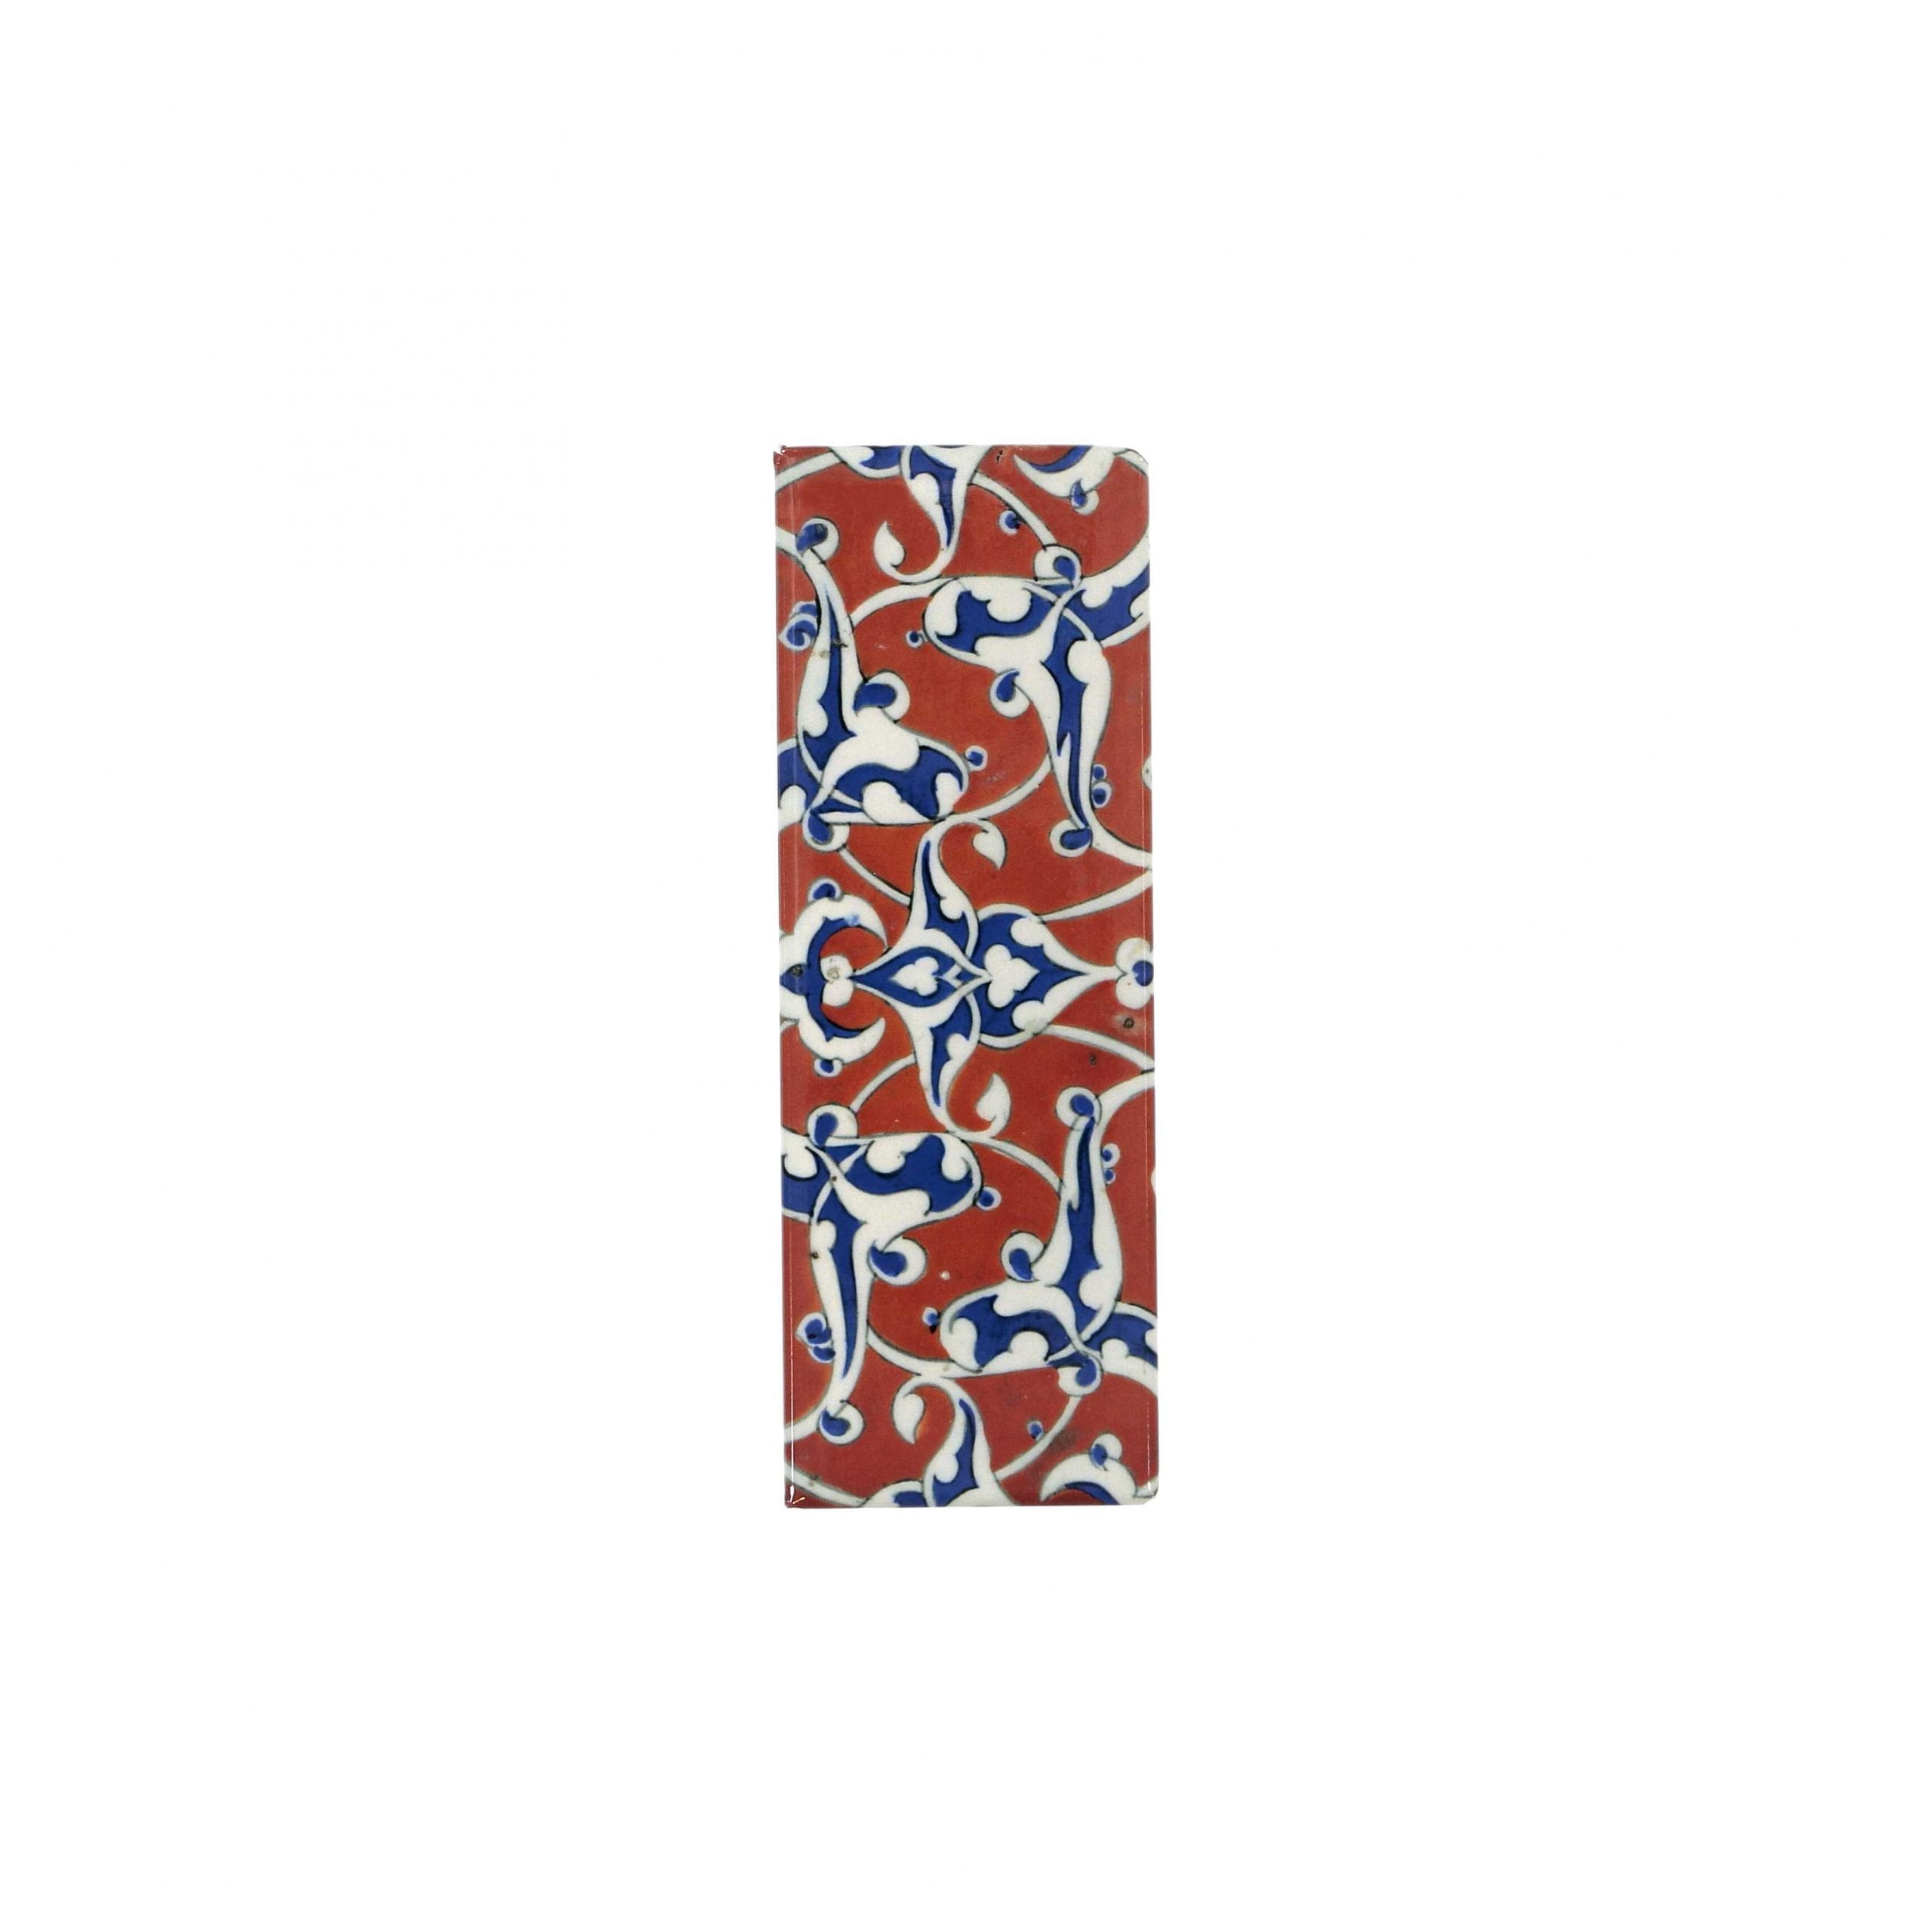 Magnet Border tile with blue and white arabesques